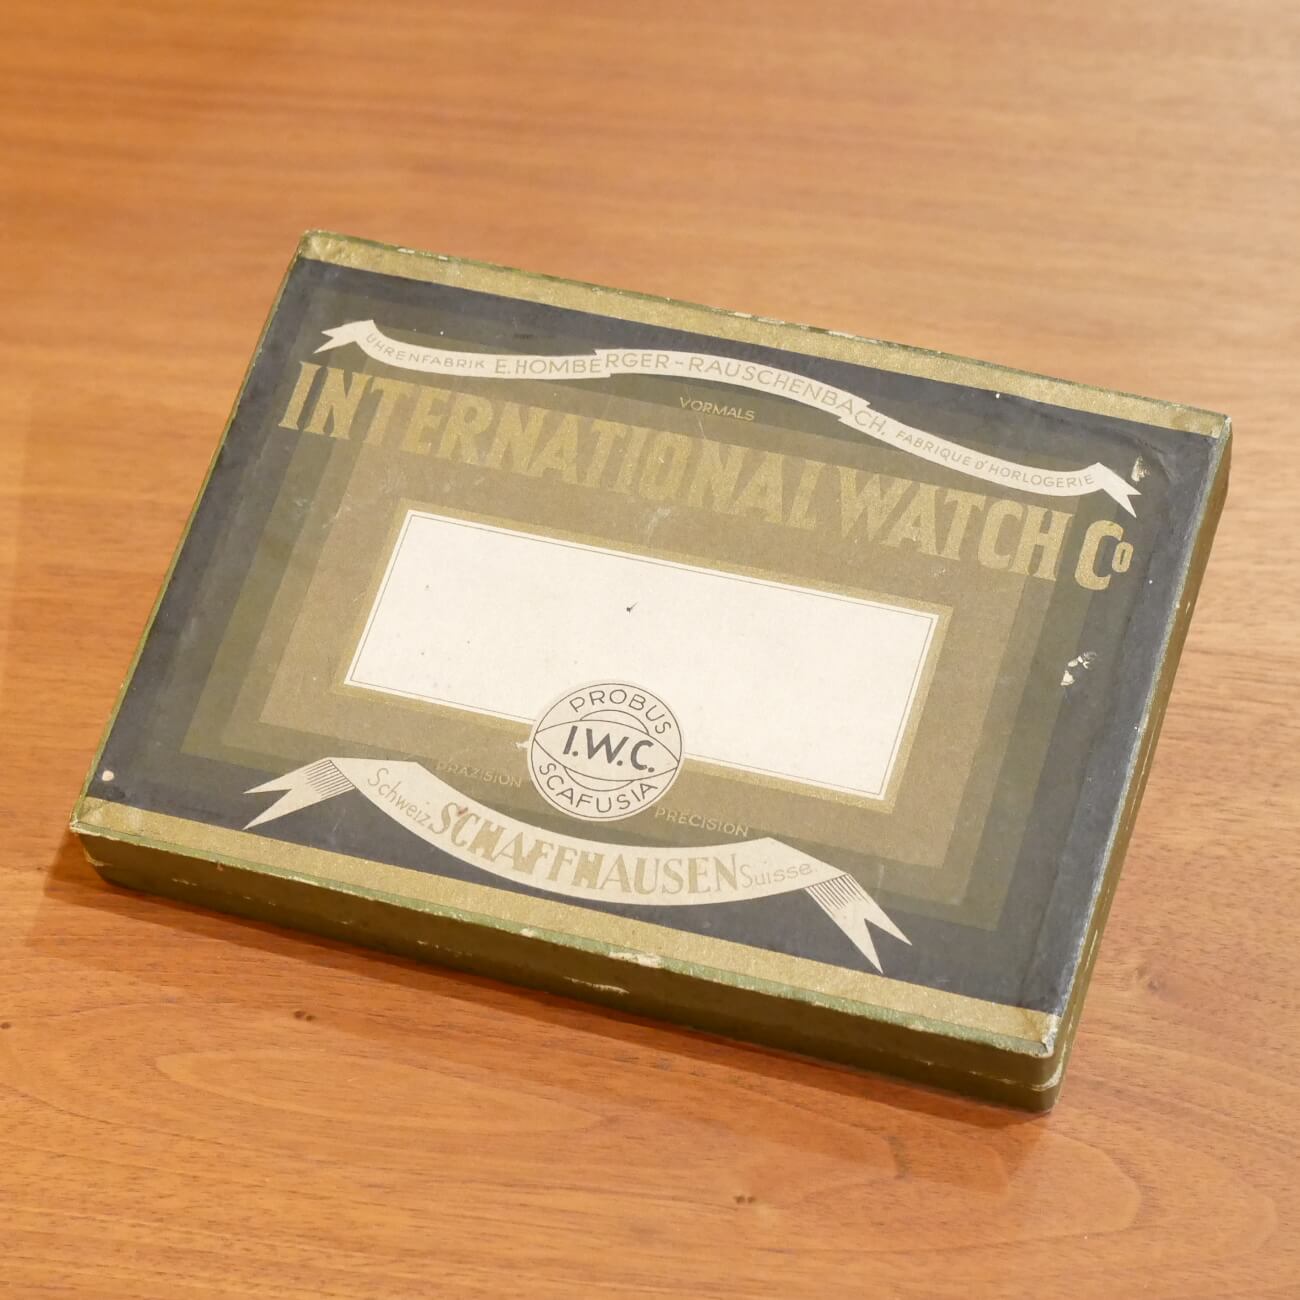 WATCH CASE & OTHER IWC PAPER BOX